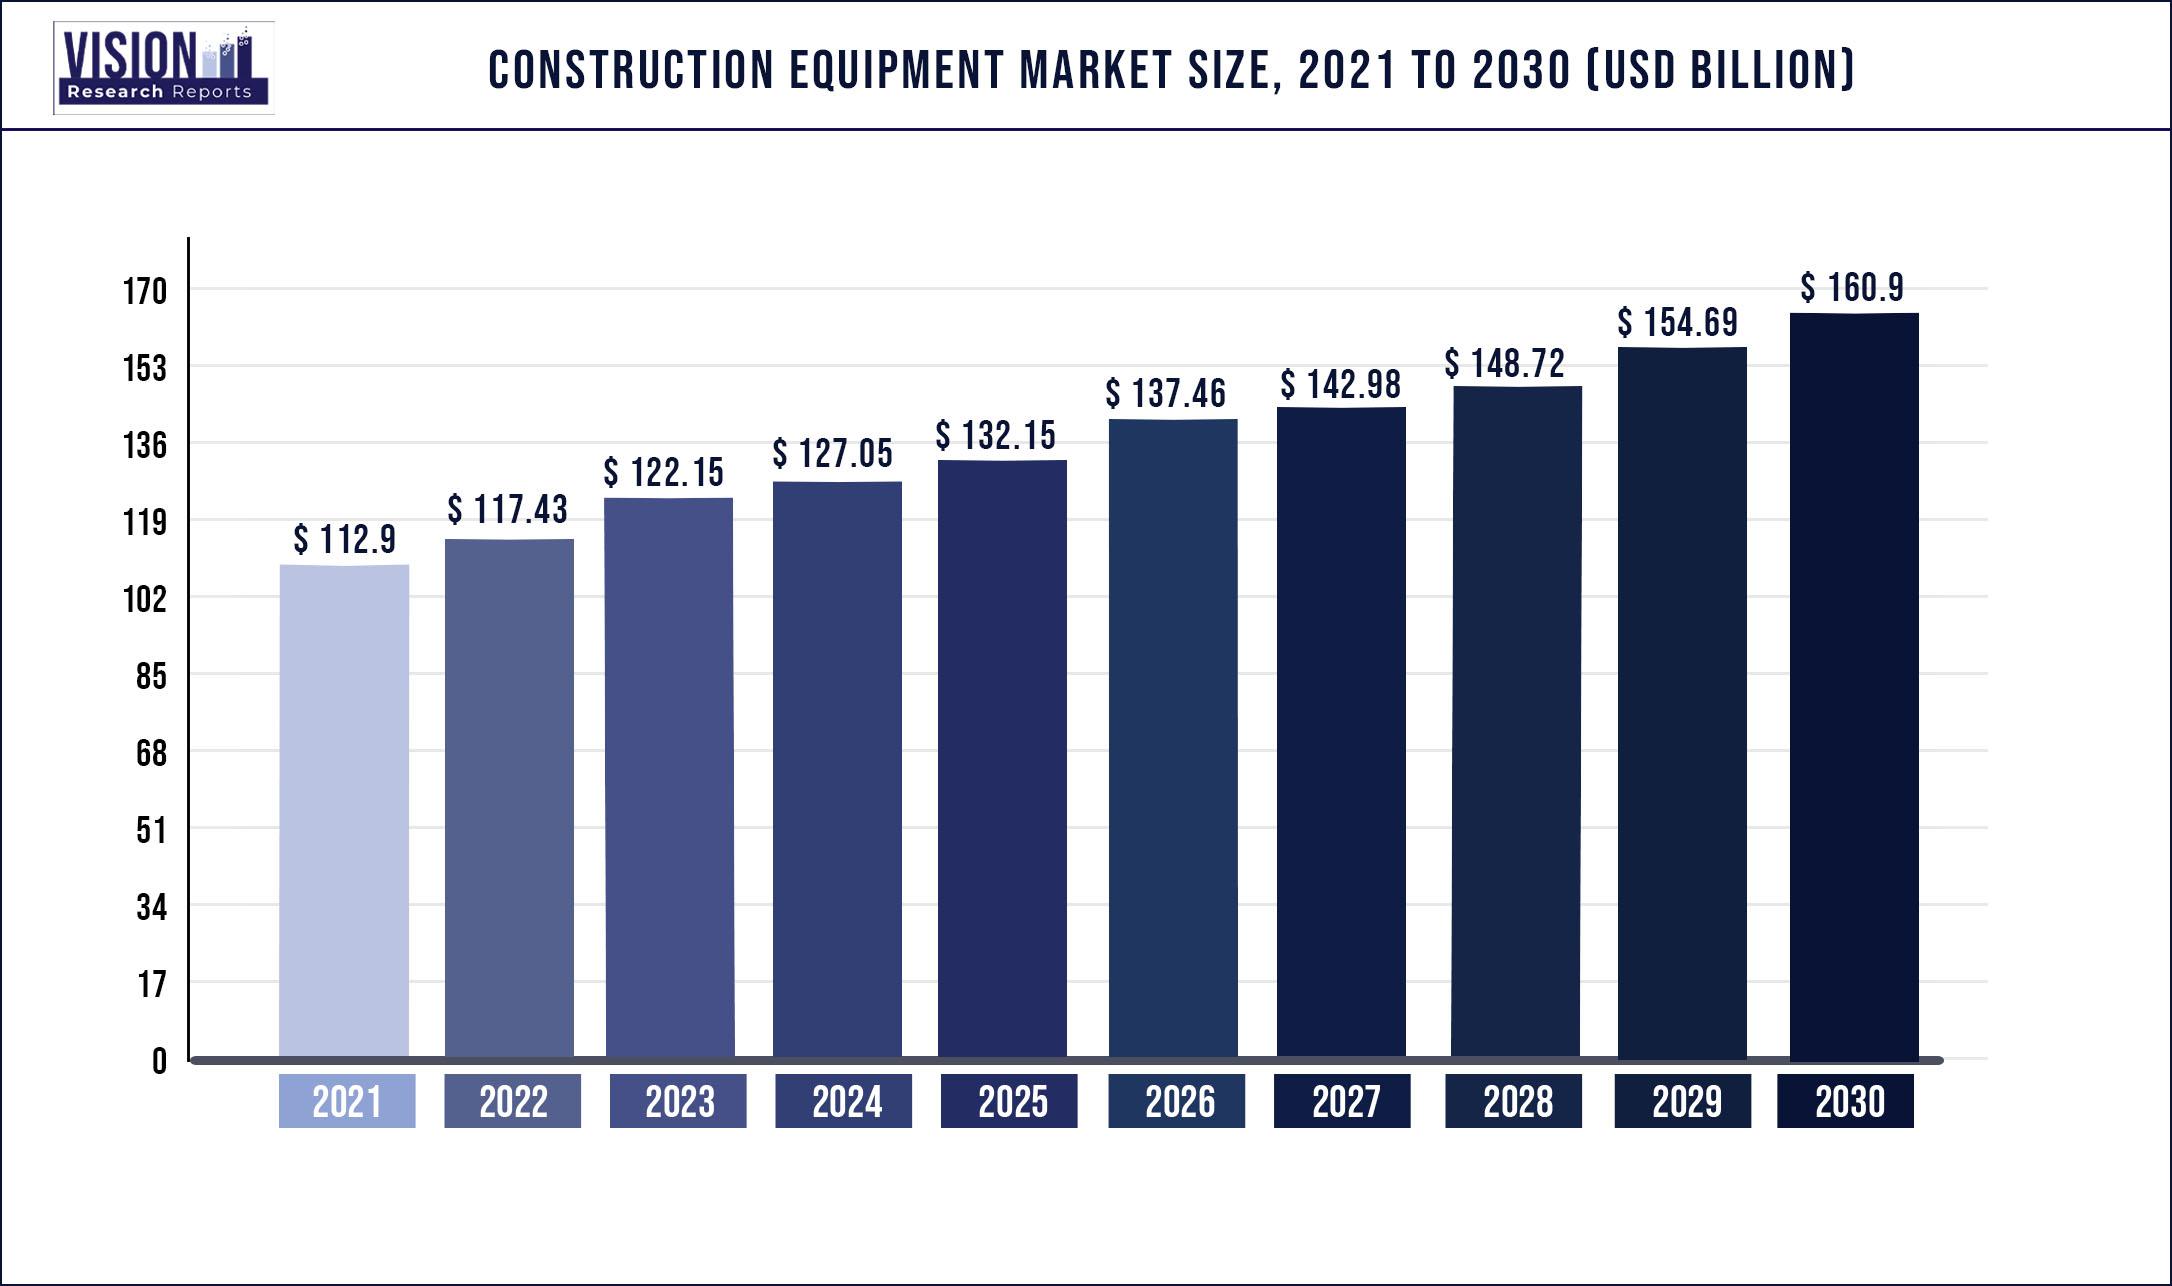 Construction Equipment Market Size 2021 to 2030